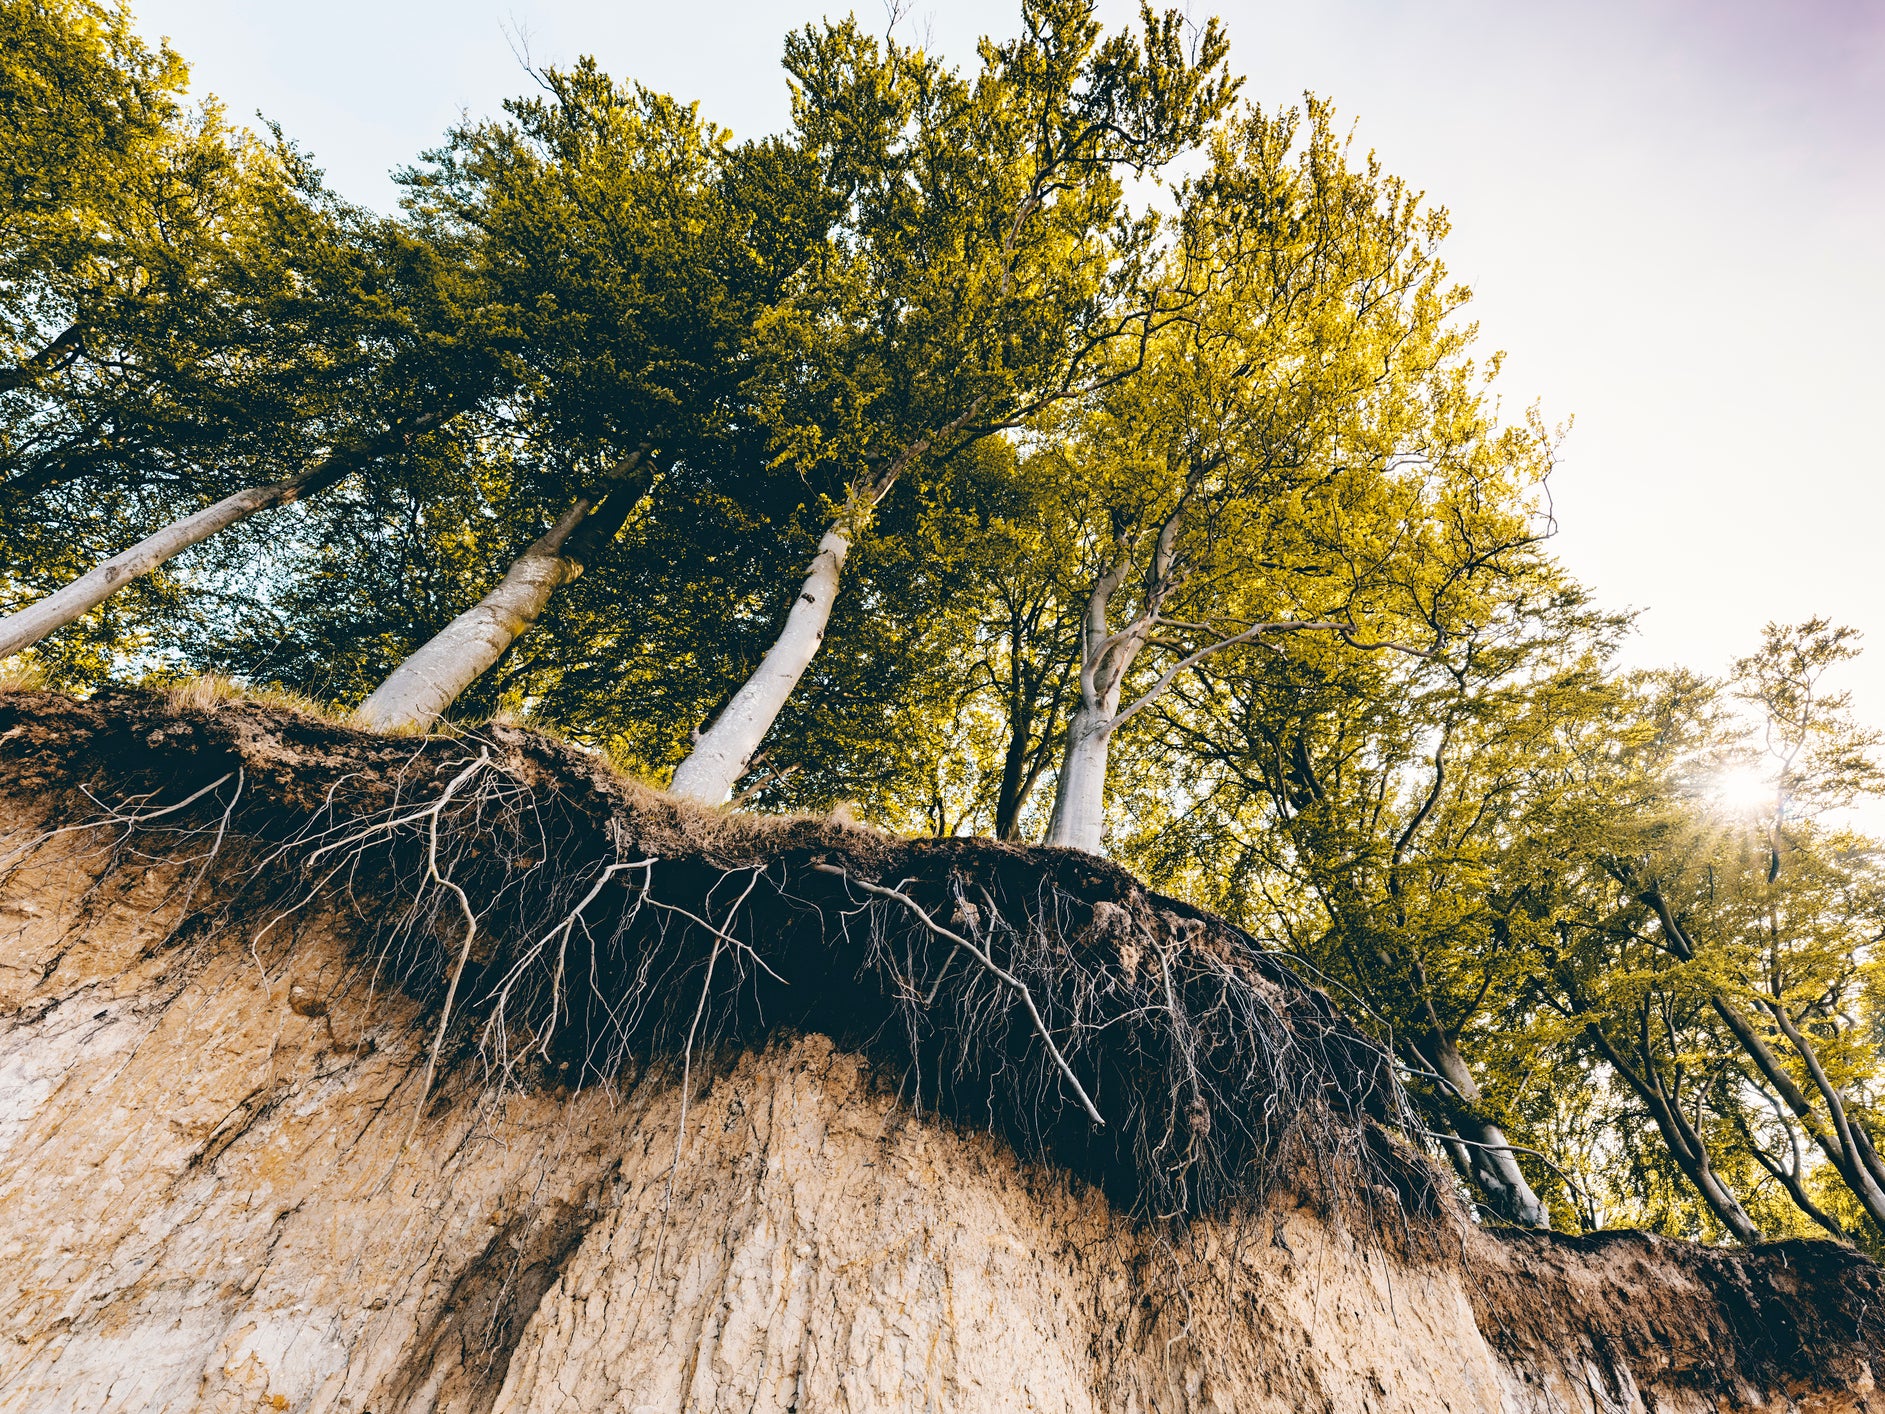 Trees’ roots can graft onto one another to hold each other for physical support and share nutrients